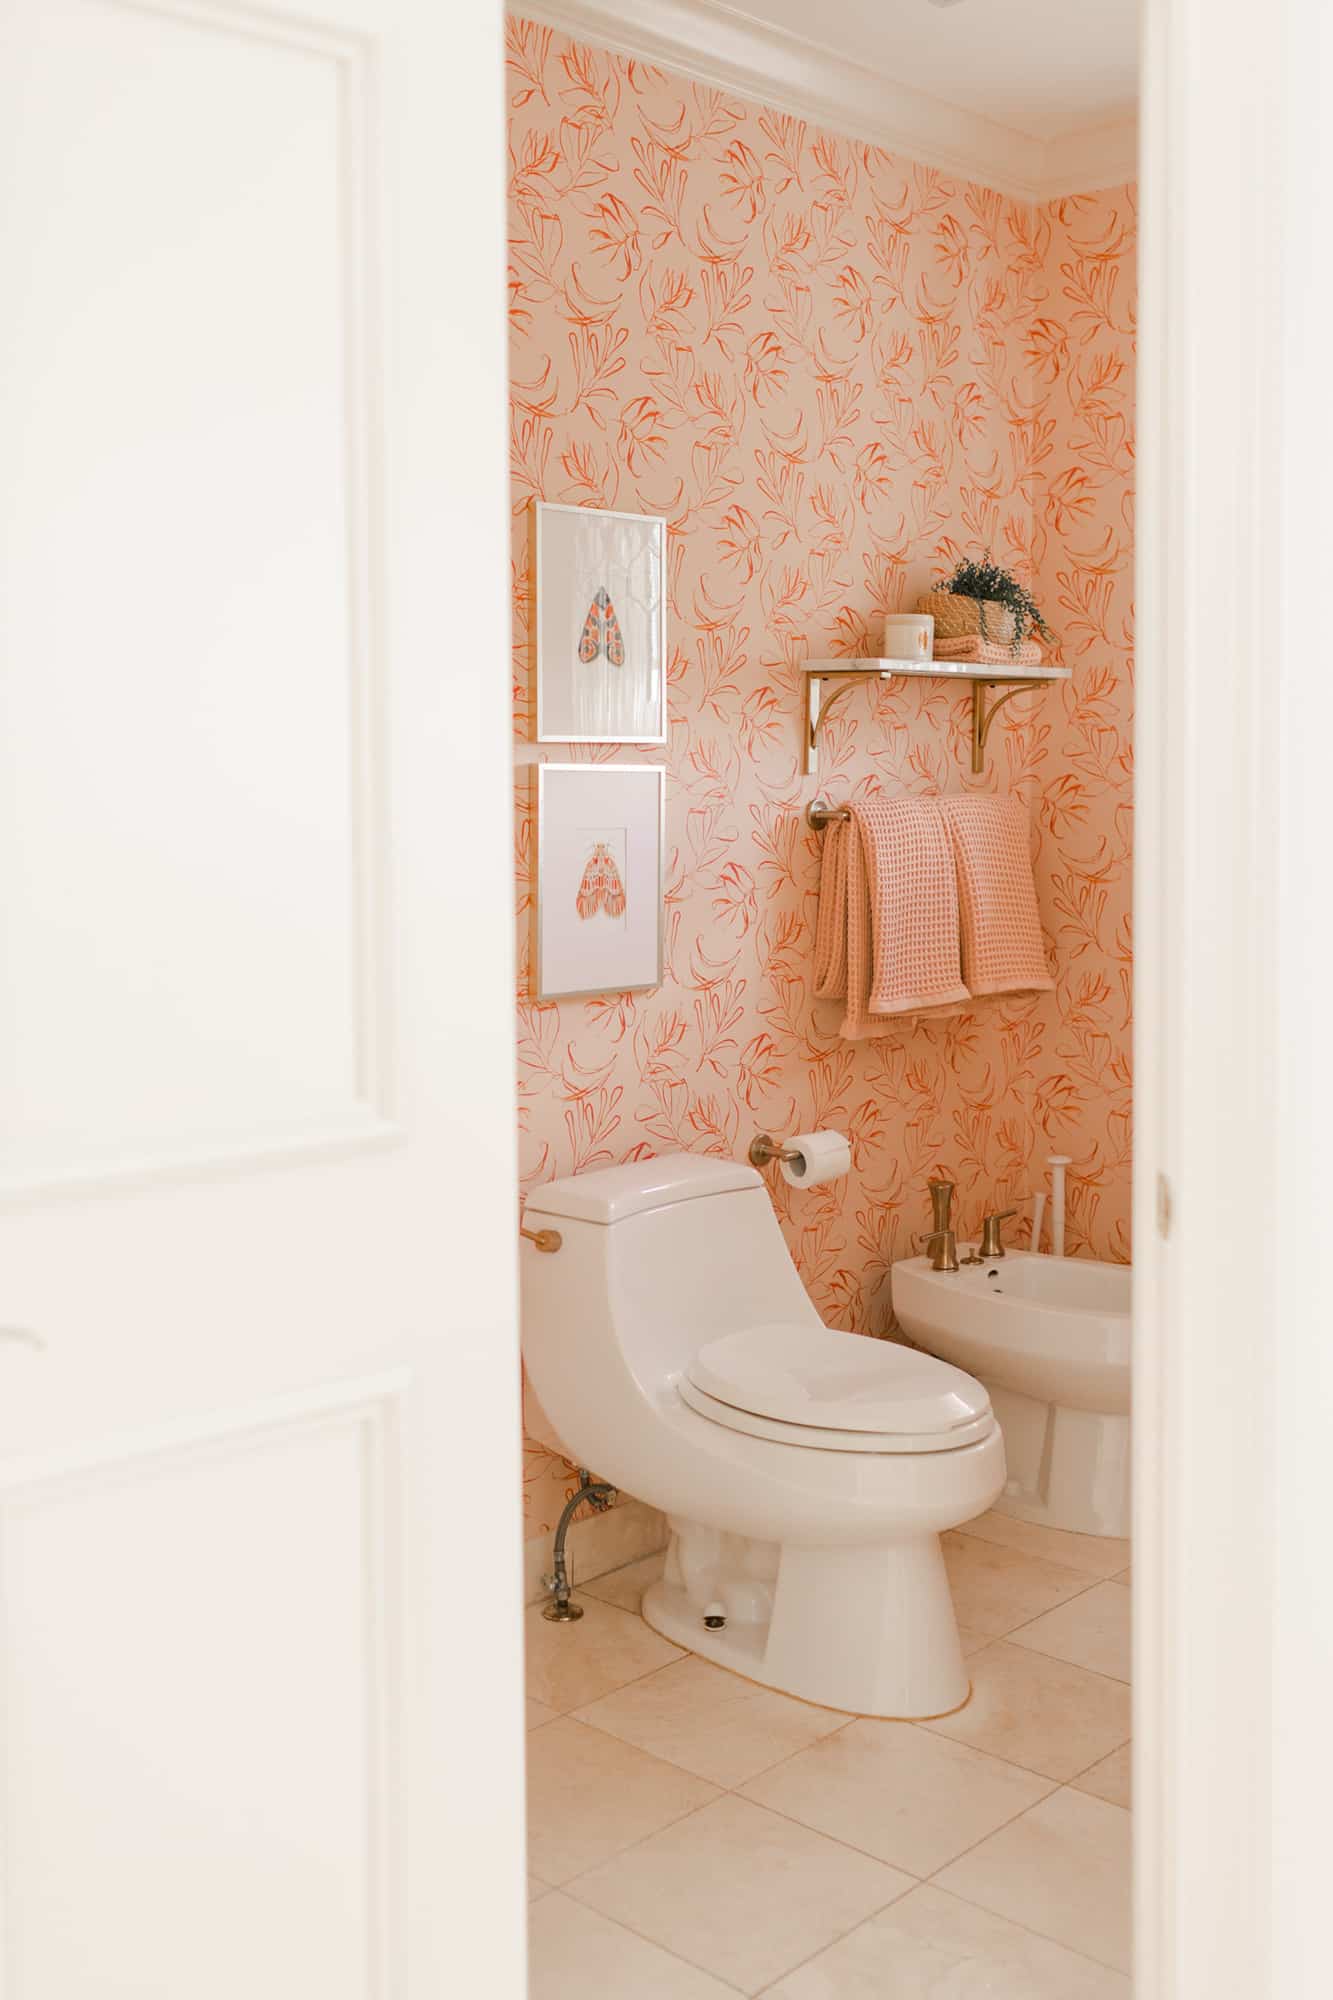 pink with flower wallpaper in a bathroom wiht a toilet and bidet